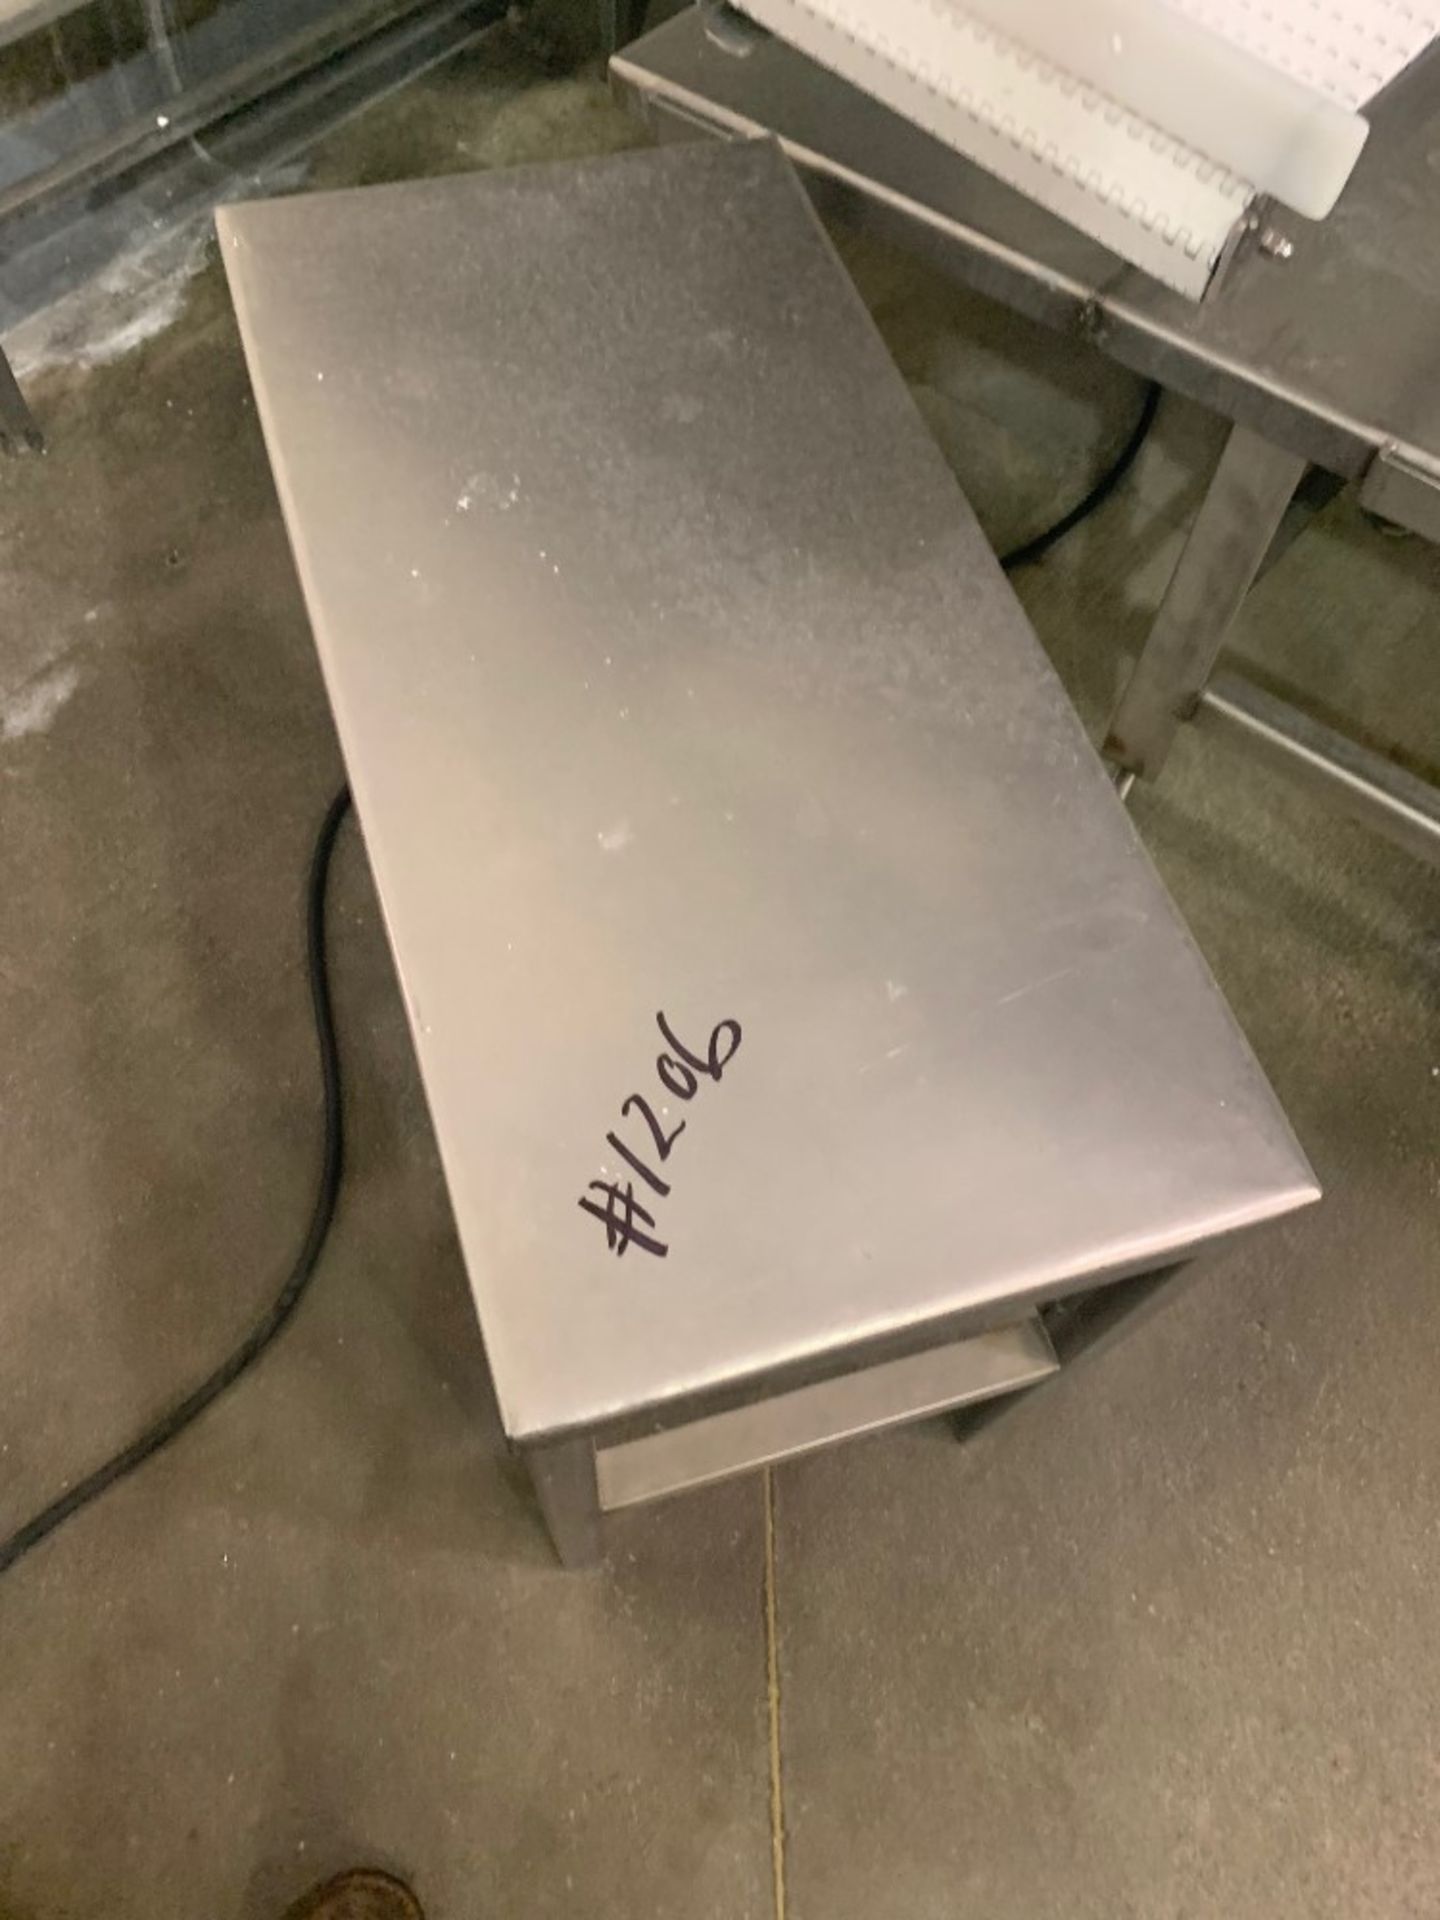 Large Lot (15) Stainless Steel Tables, miscellaneous sizes: Required Loading Fee $400.00, Rigger- - Image 3 of 7